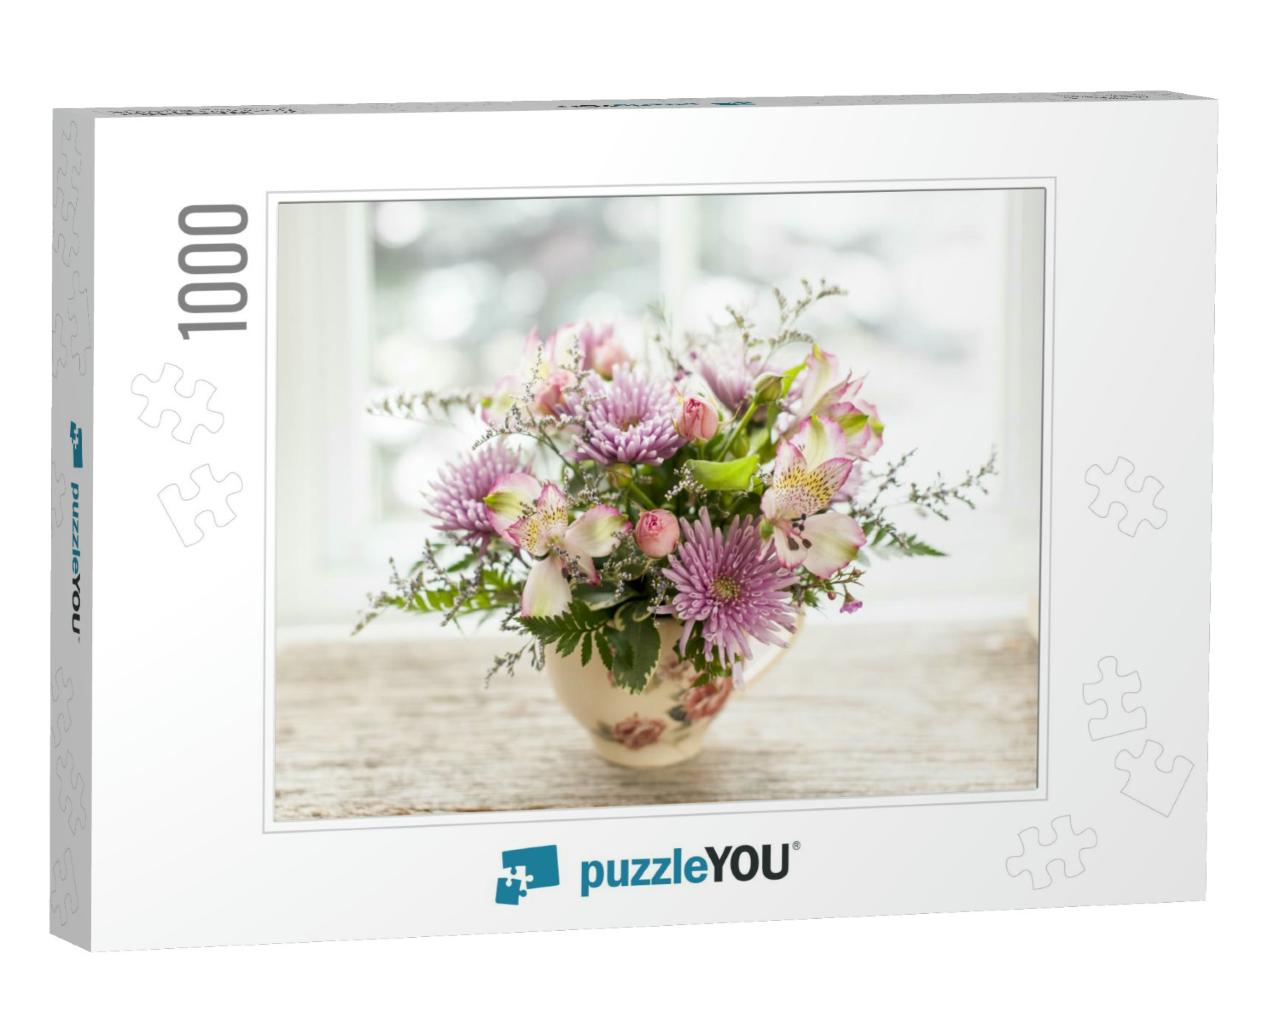 Bouquet of Colorful Flowers Arranged in Small Vase... Jigsaw Puzzle with 1000 pieces